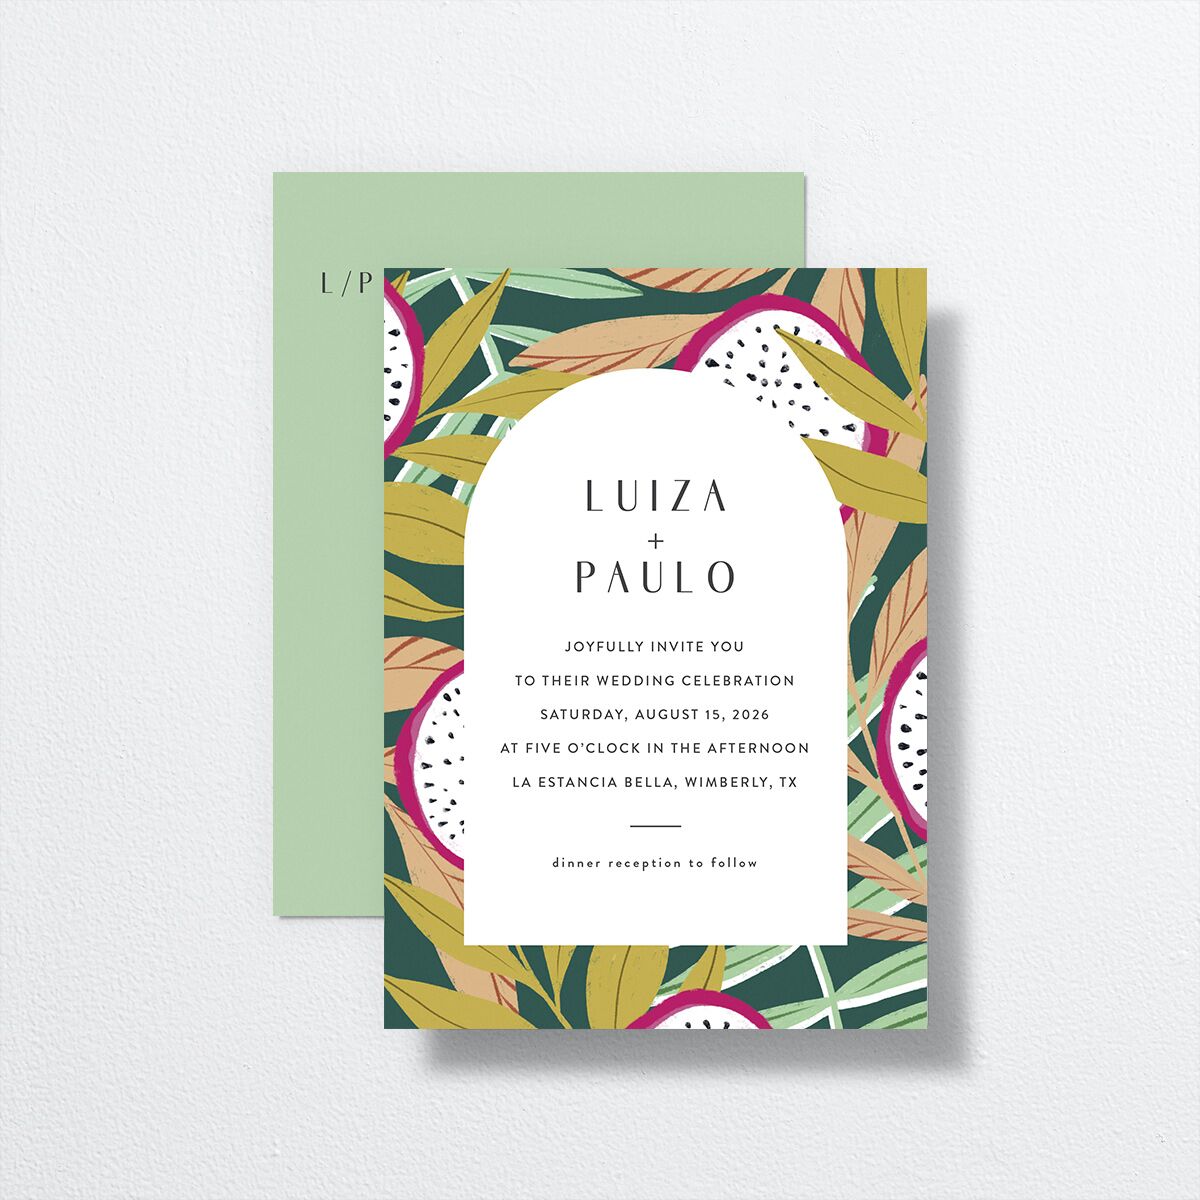 Vibrant Rio Wedding Invitations front-and-back in teal